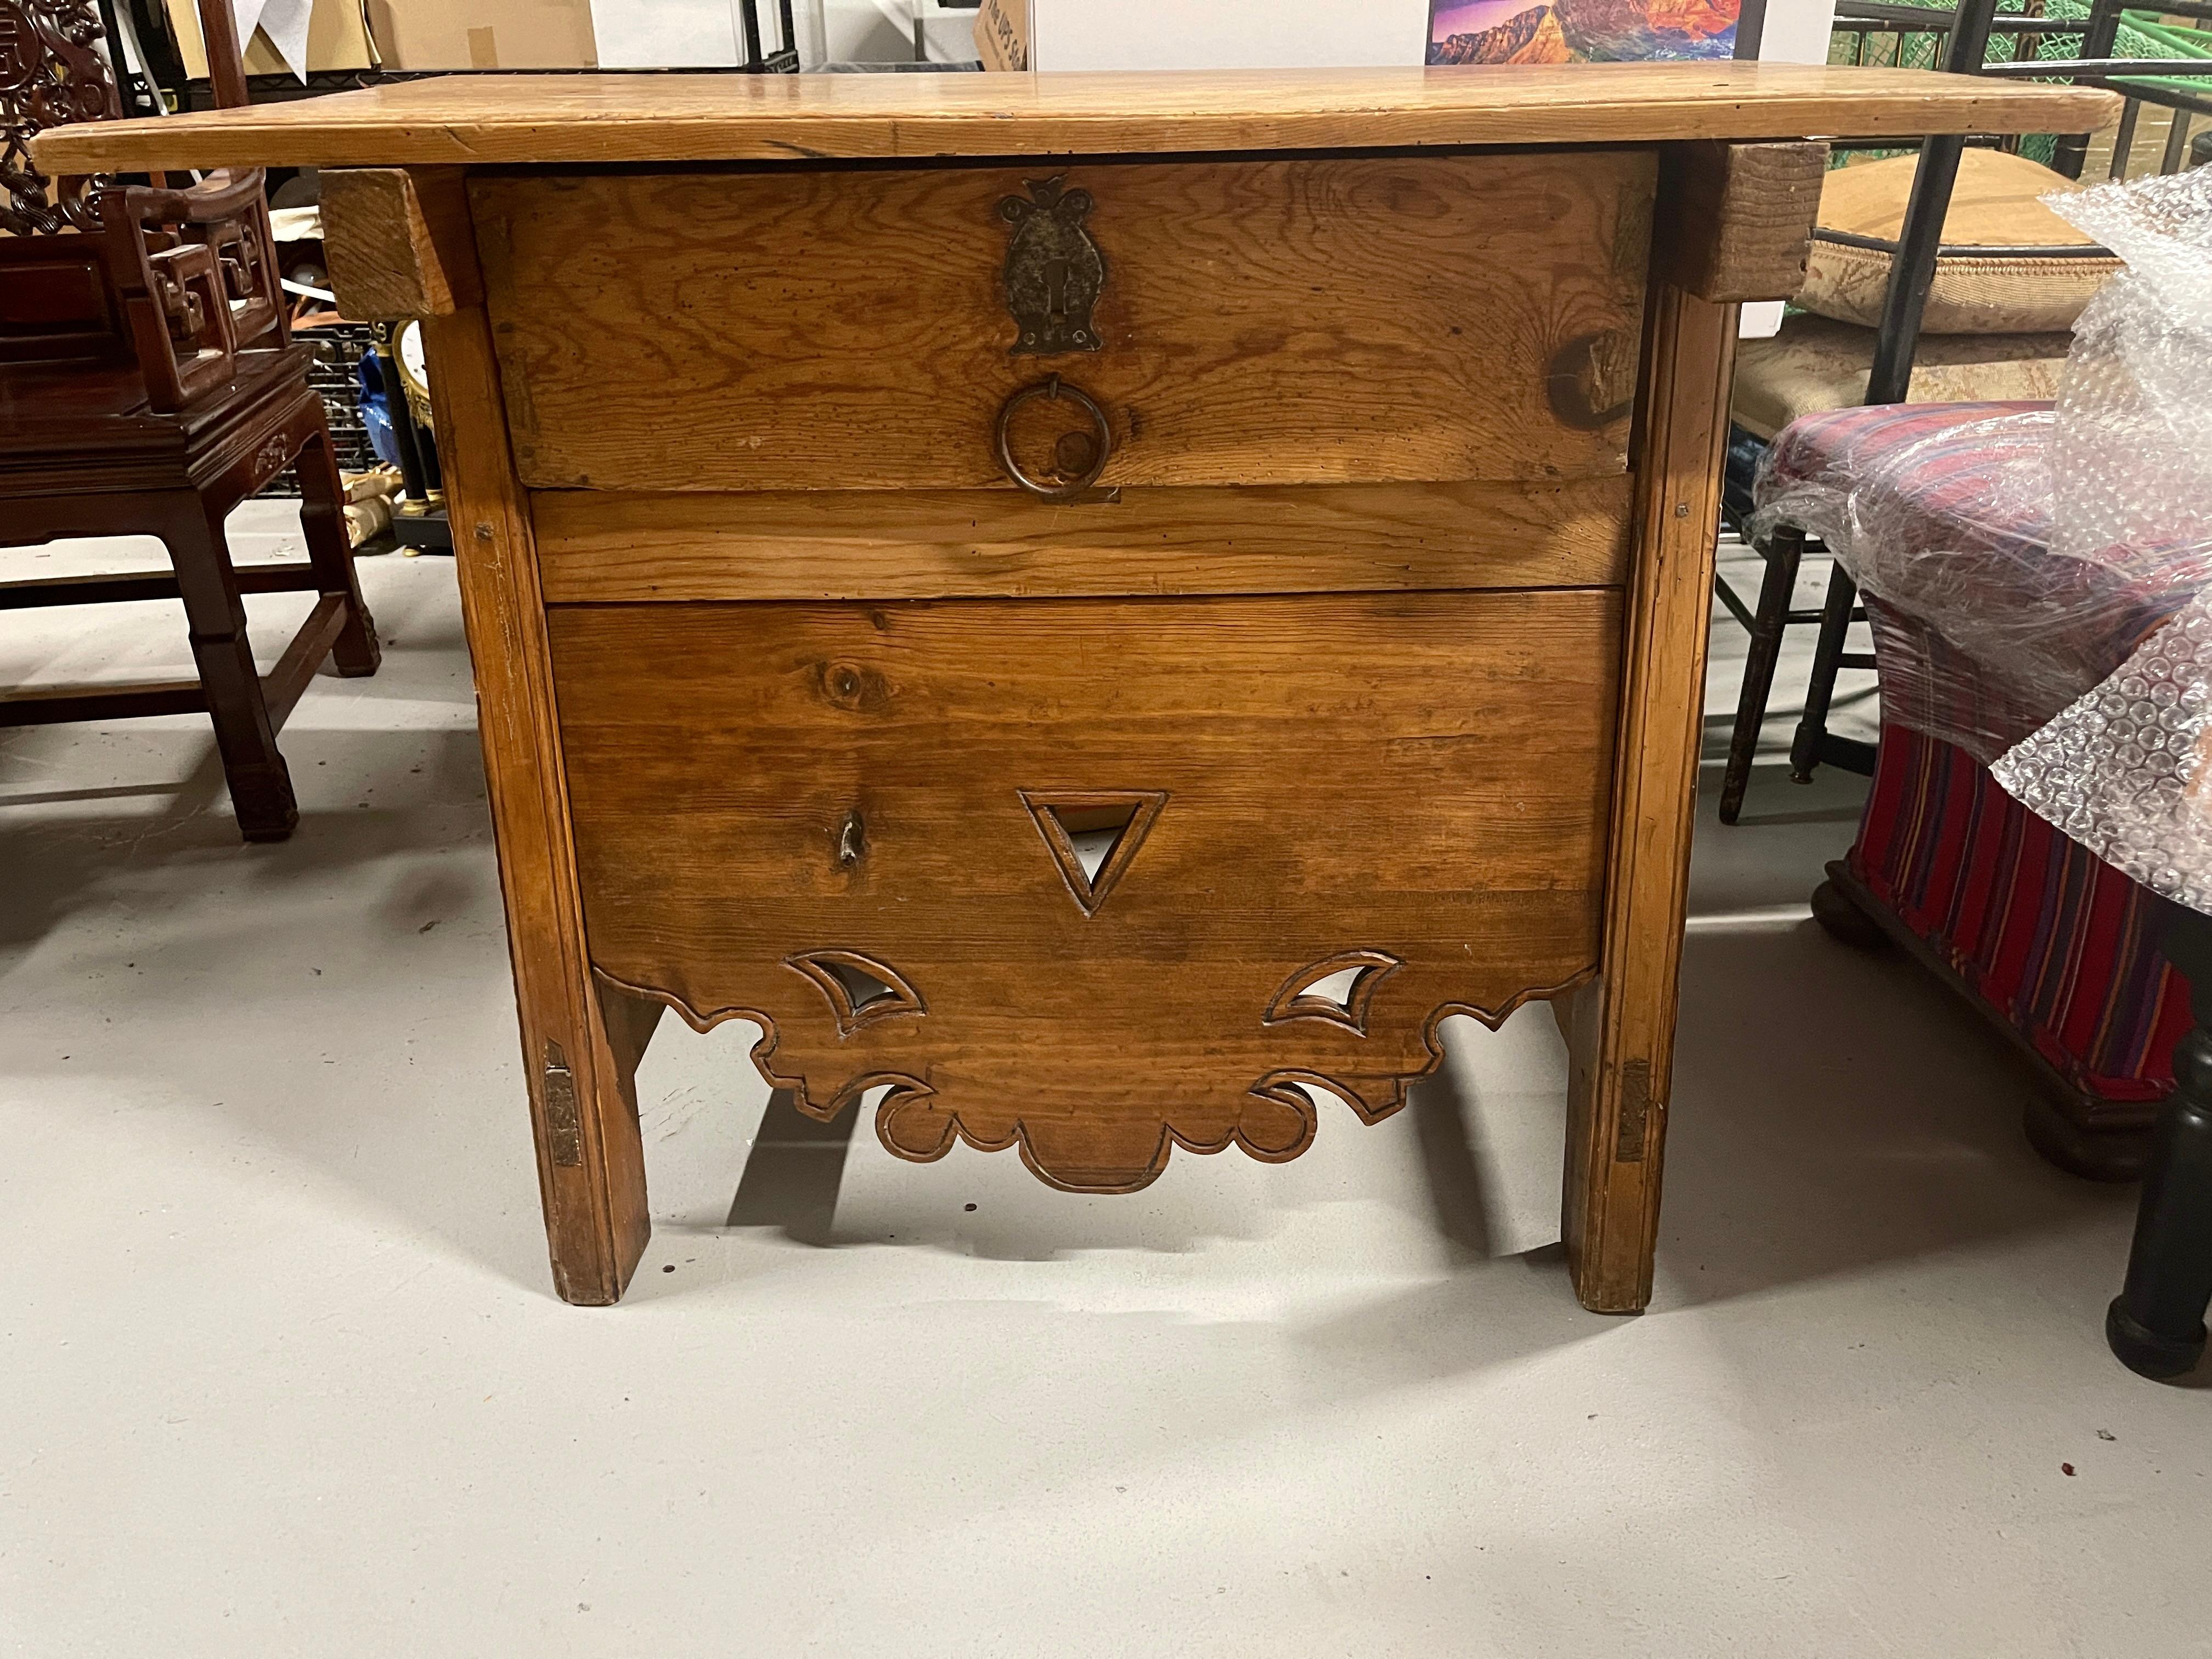 Great looking antique one drawer nightstand or table. Spanish Colonial likely Mexican. At least 19th century possible earlier. Old hardware and hand crafted nails. Out of a wonderful Palm Springs Estate. In good age appropriate condition. Some